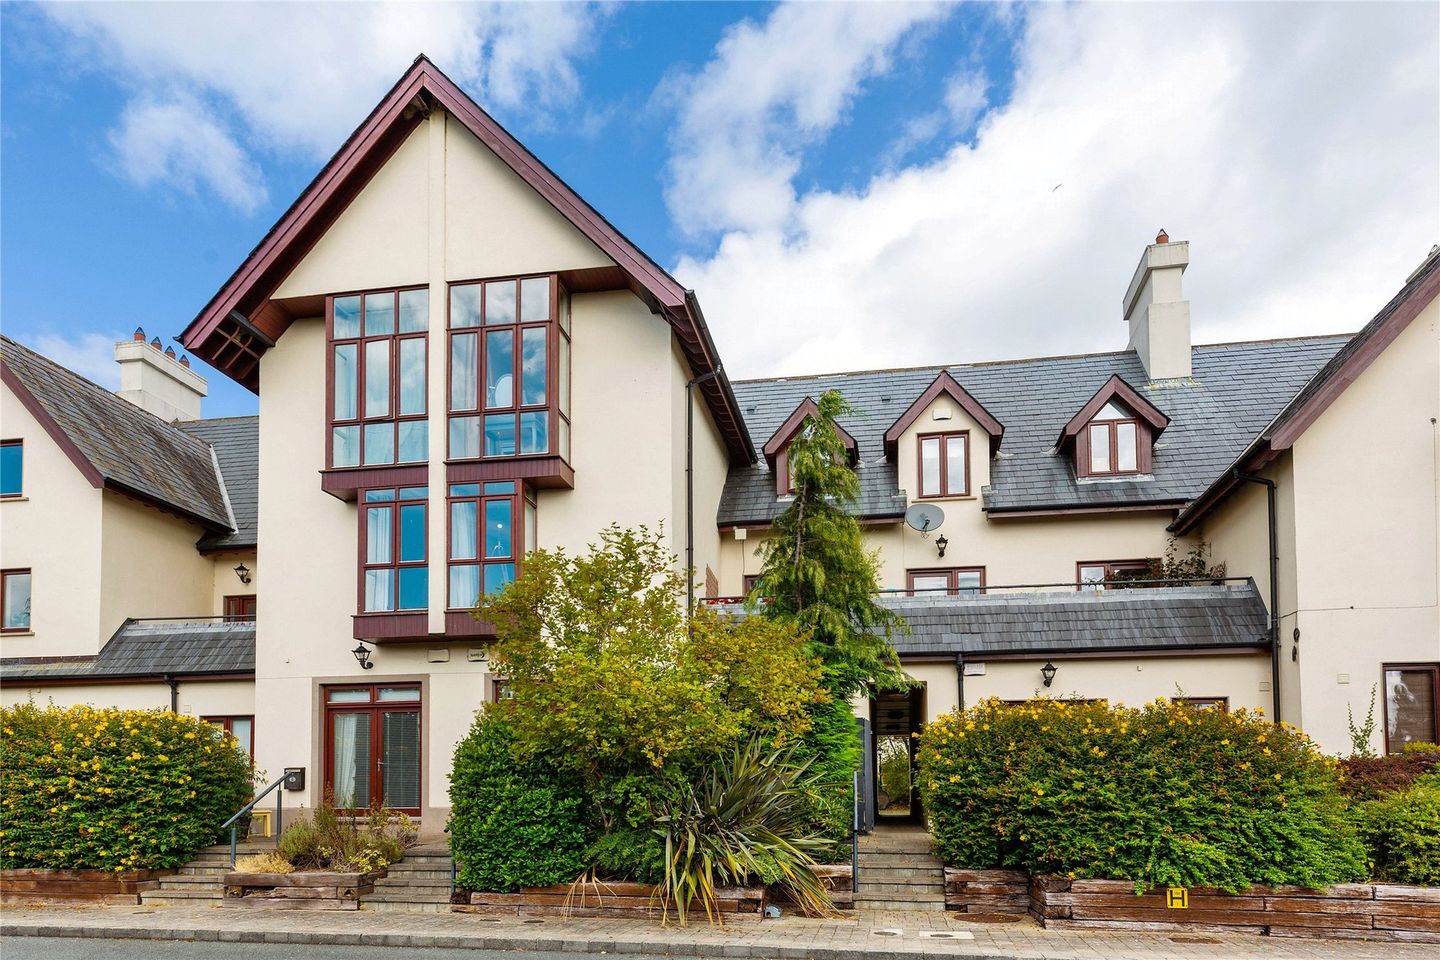 7 Ferndale Court, Allies River Road, Bray